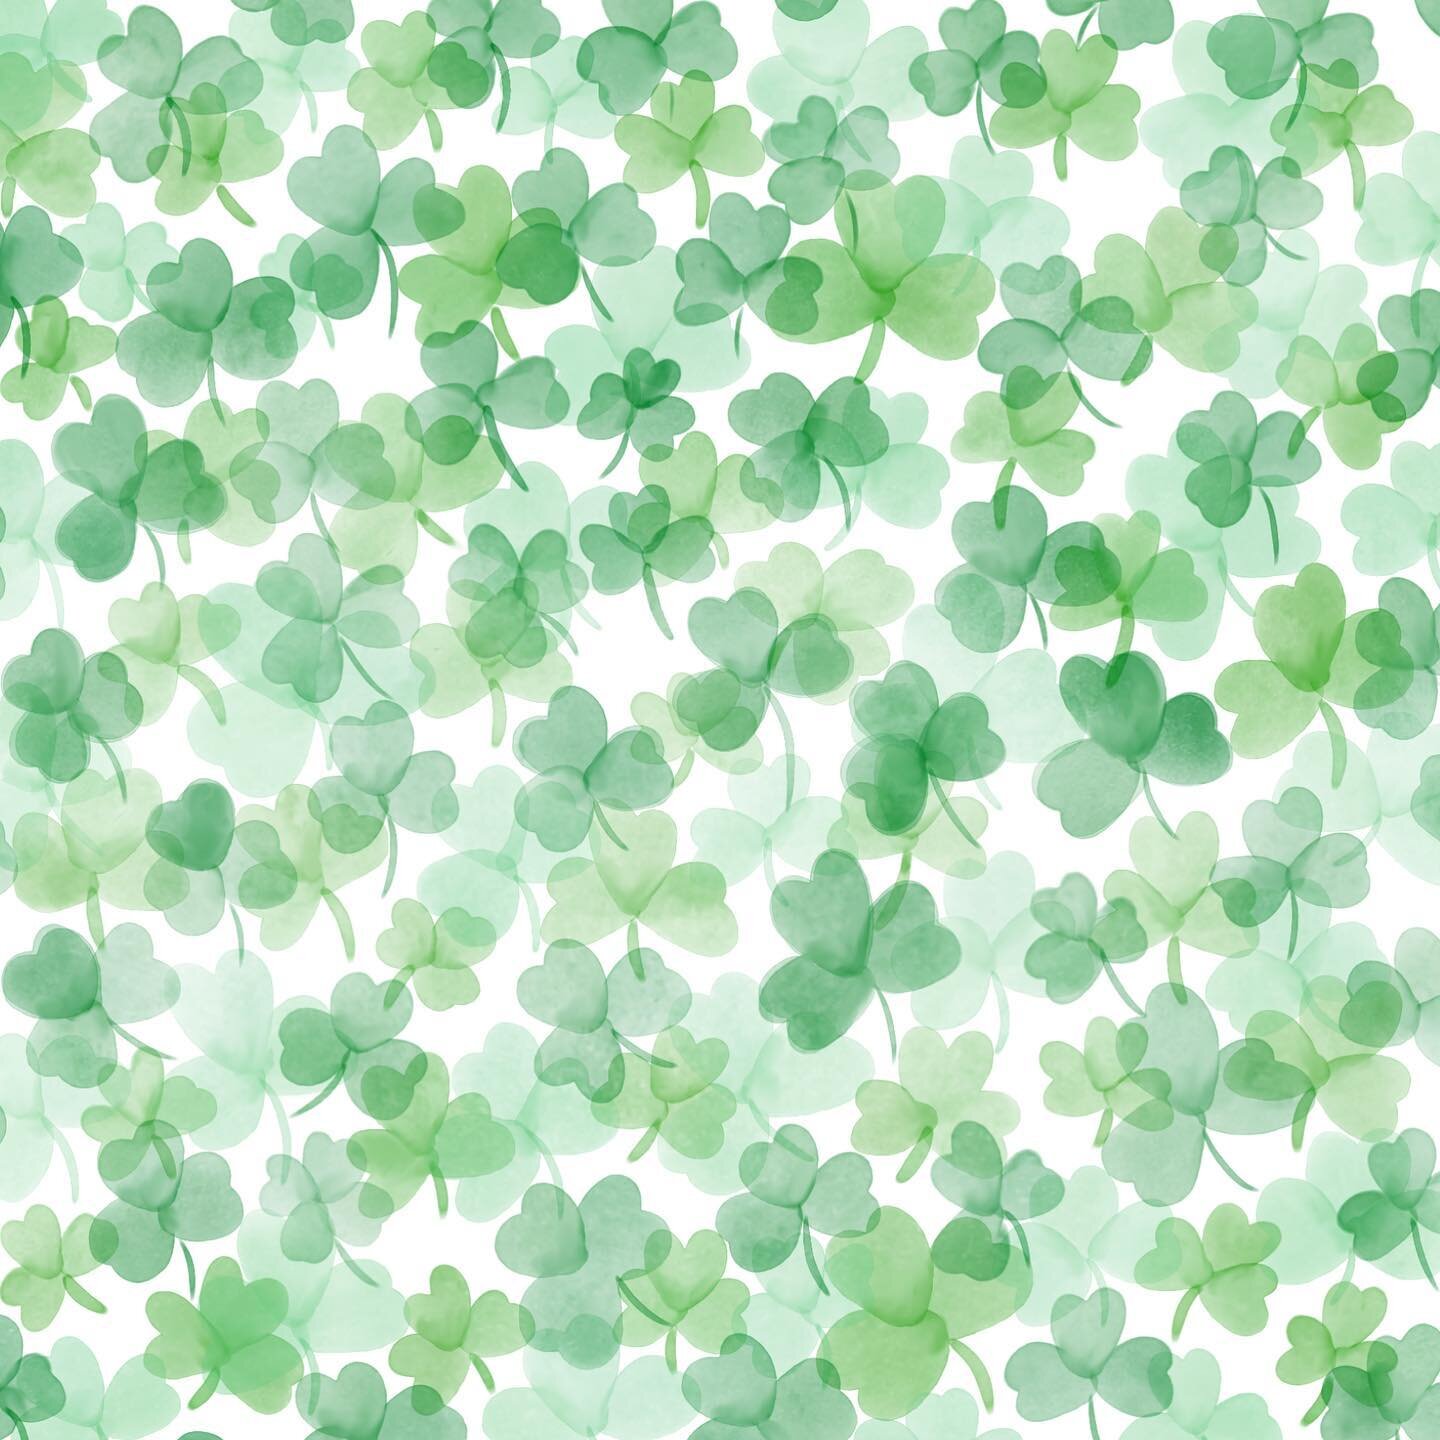 Happy St. Patrick&rsquo;s day! 🍀Can you find the 4 leaf clover? 🍀 If you find it you can reply &ldquo;found it&rdquo; in the comments. Don&rsquo;t give it away to everyone else 🙊#stpatricksday #stpattysday #luck #luckoftheirish #fourleafclover #te